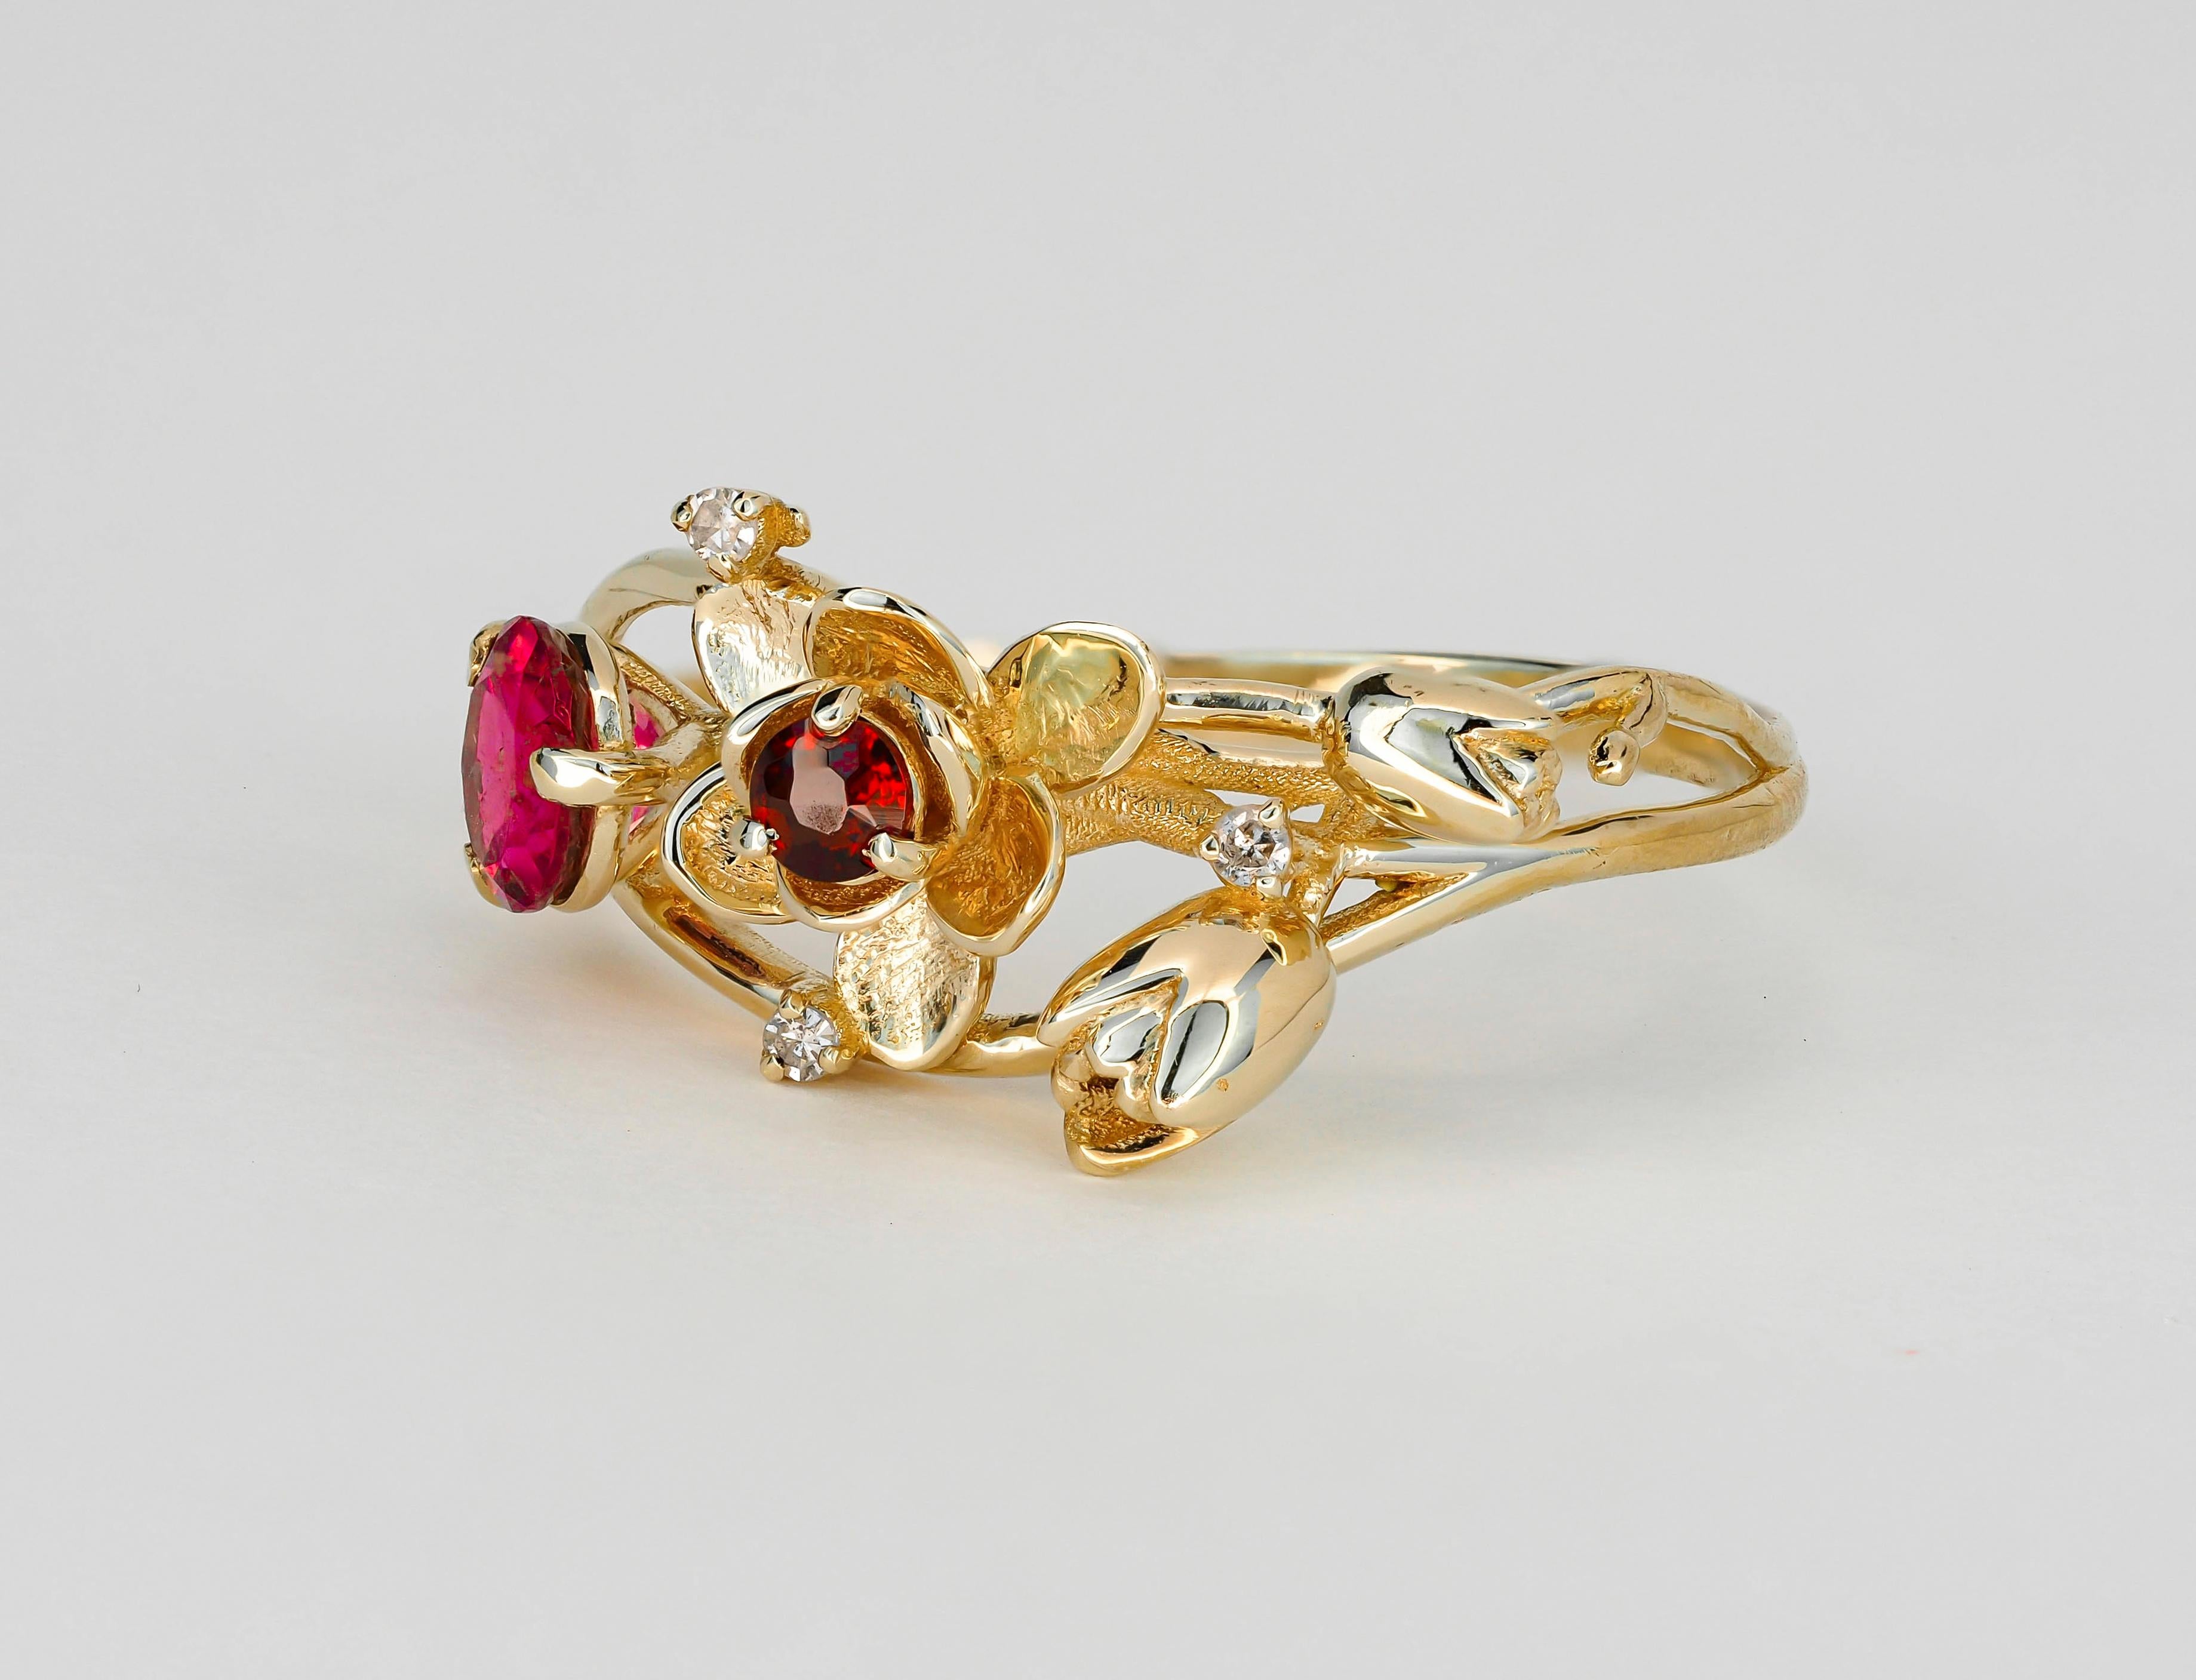 For Sale:  Ruby ring. 14k Gold Ring with Ruby, Garnet and Diamonds. Orchid Flower Ring. 4